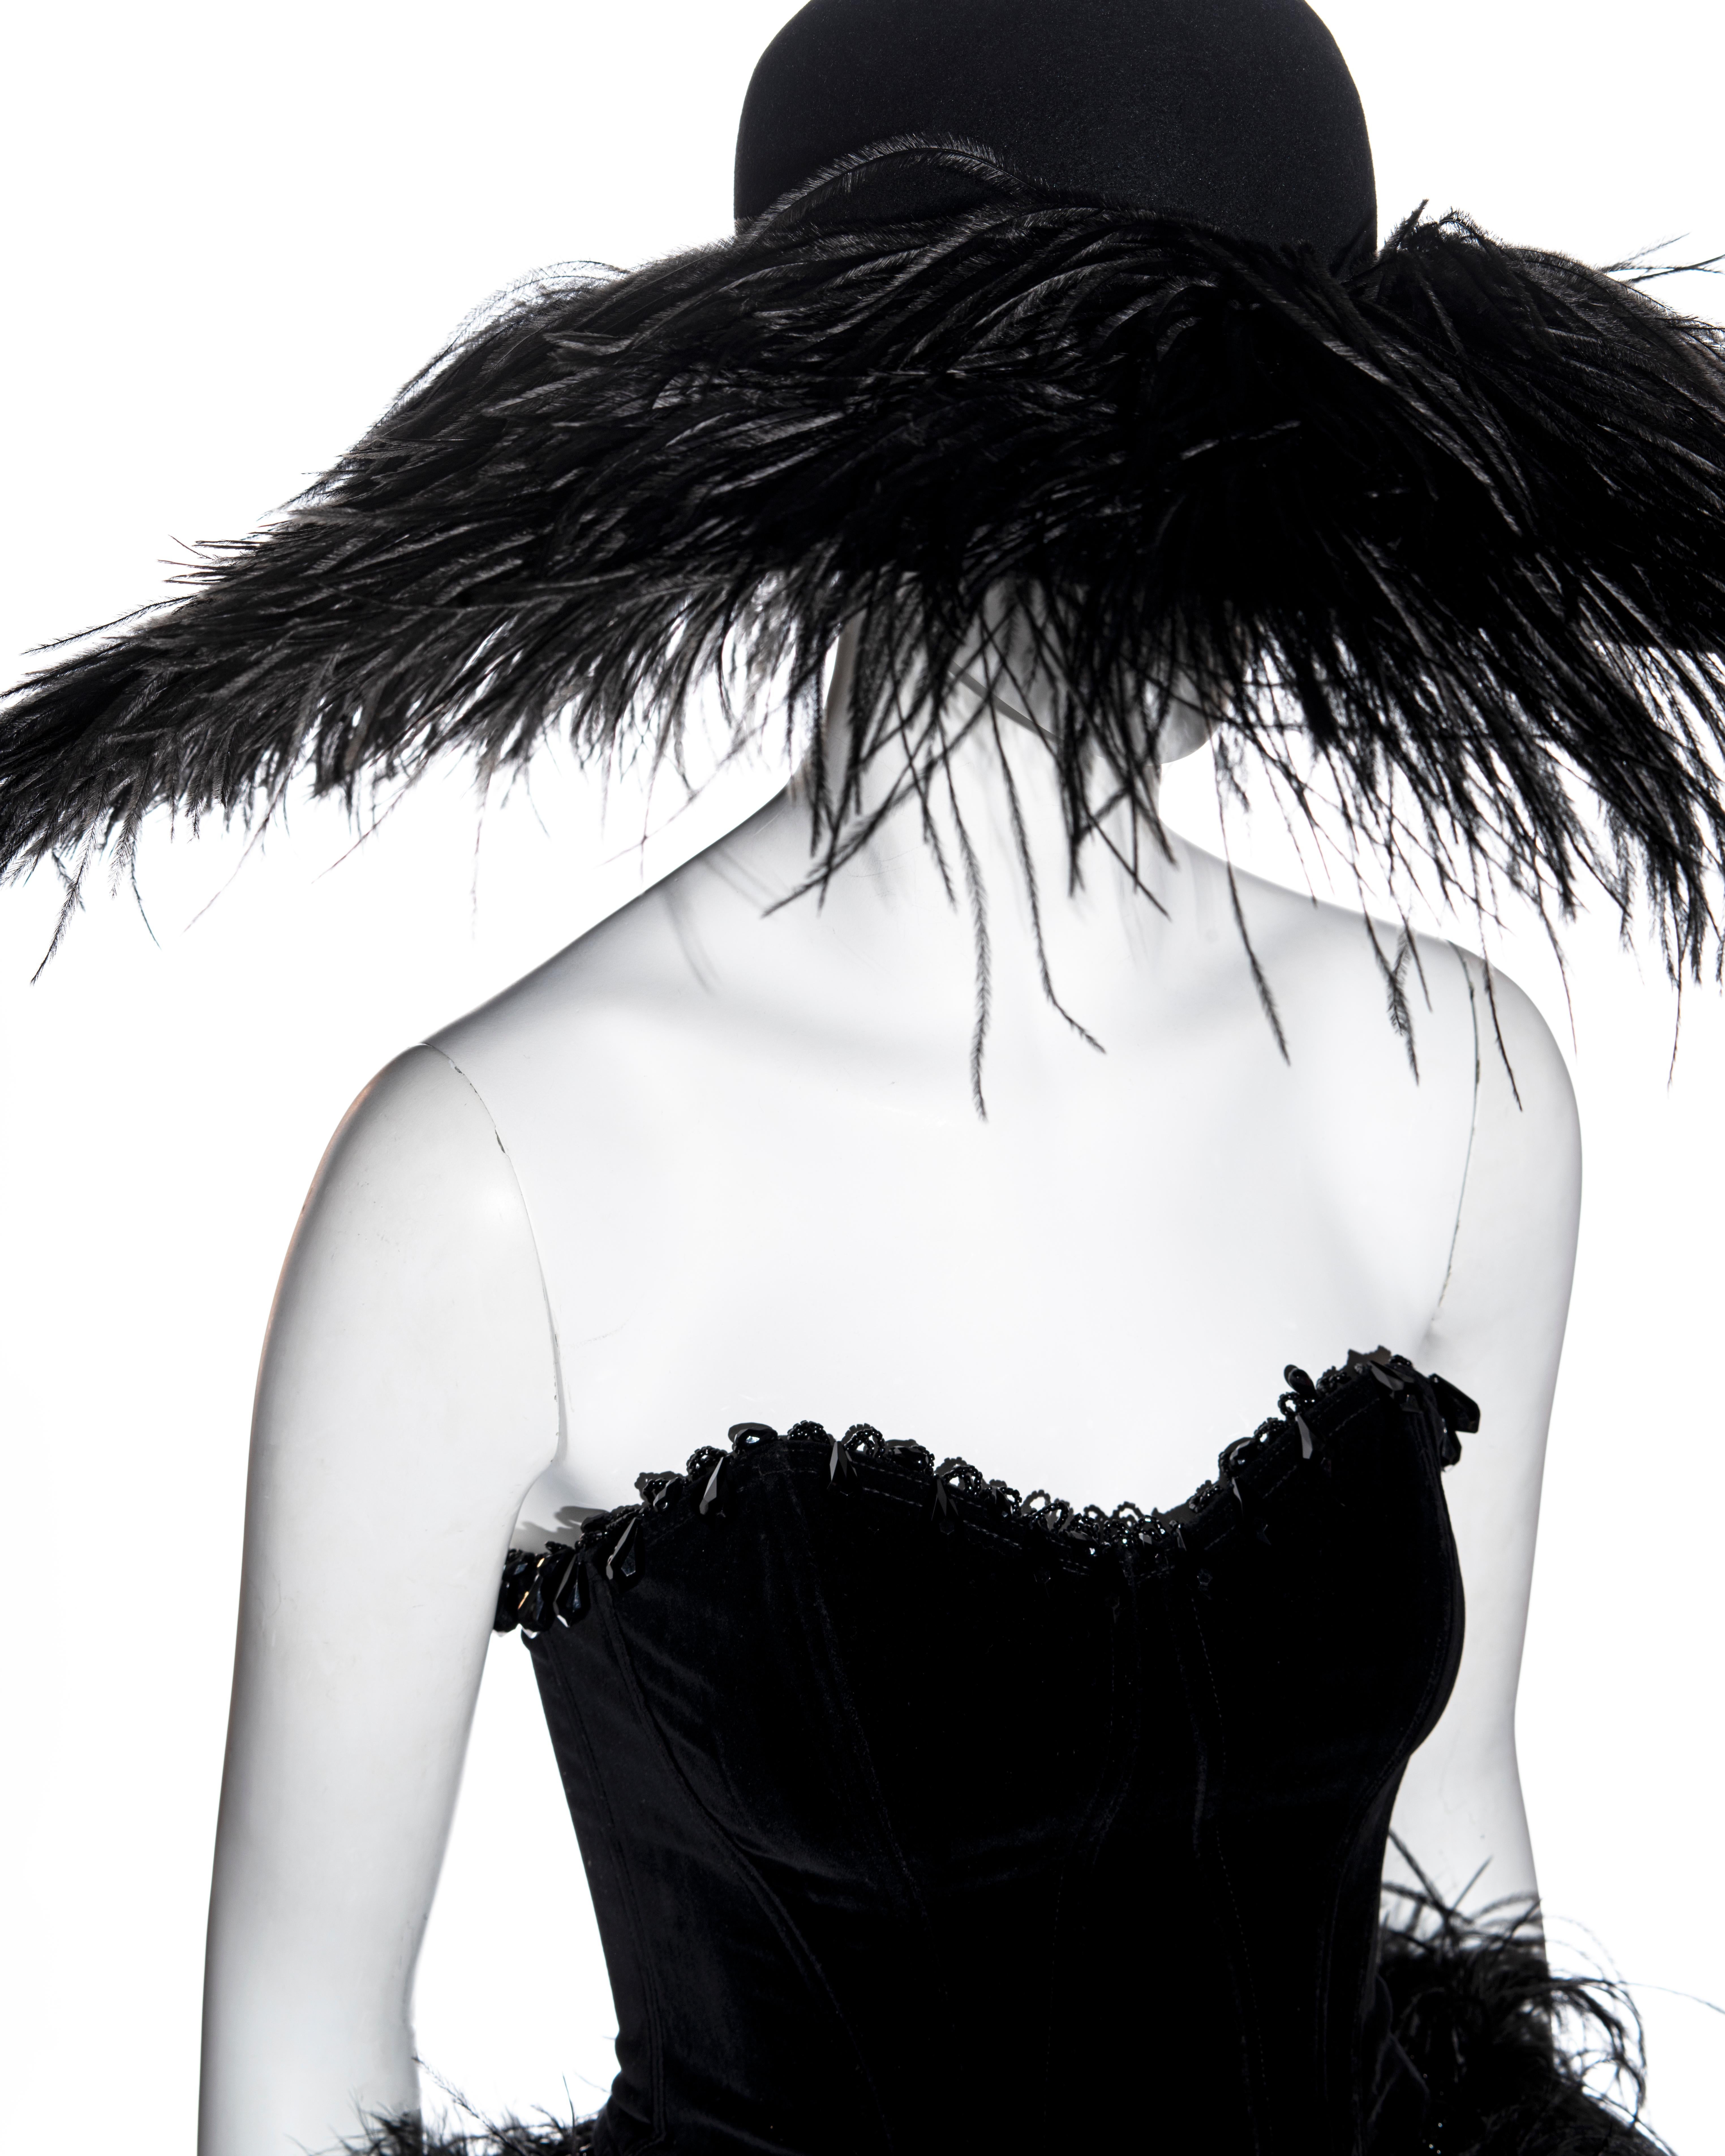 Women's Chantal Thomass black ostrich feather corset, skirt and hat ensemble, fw 1991 For Sale